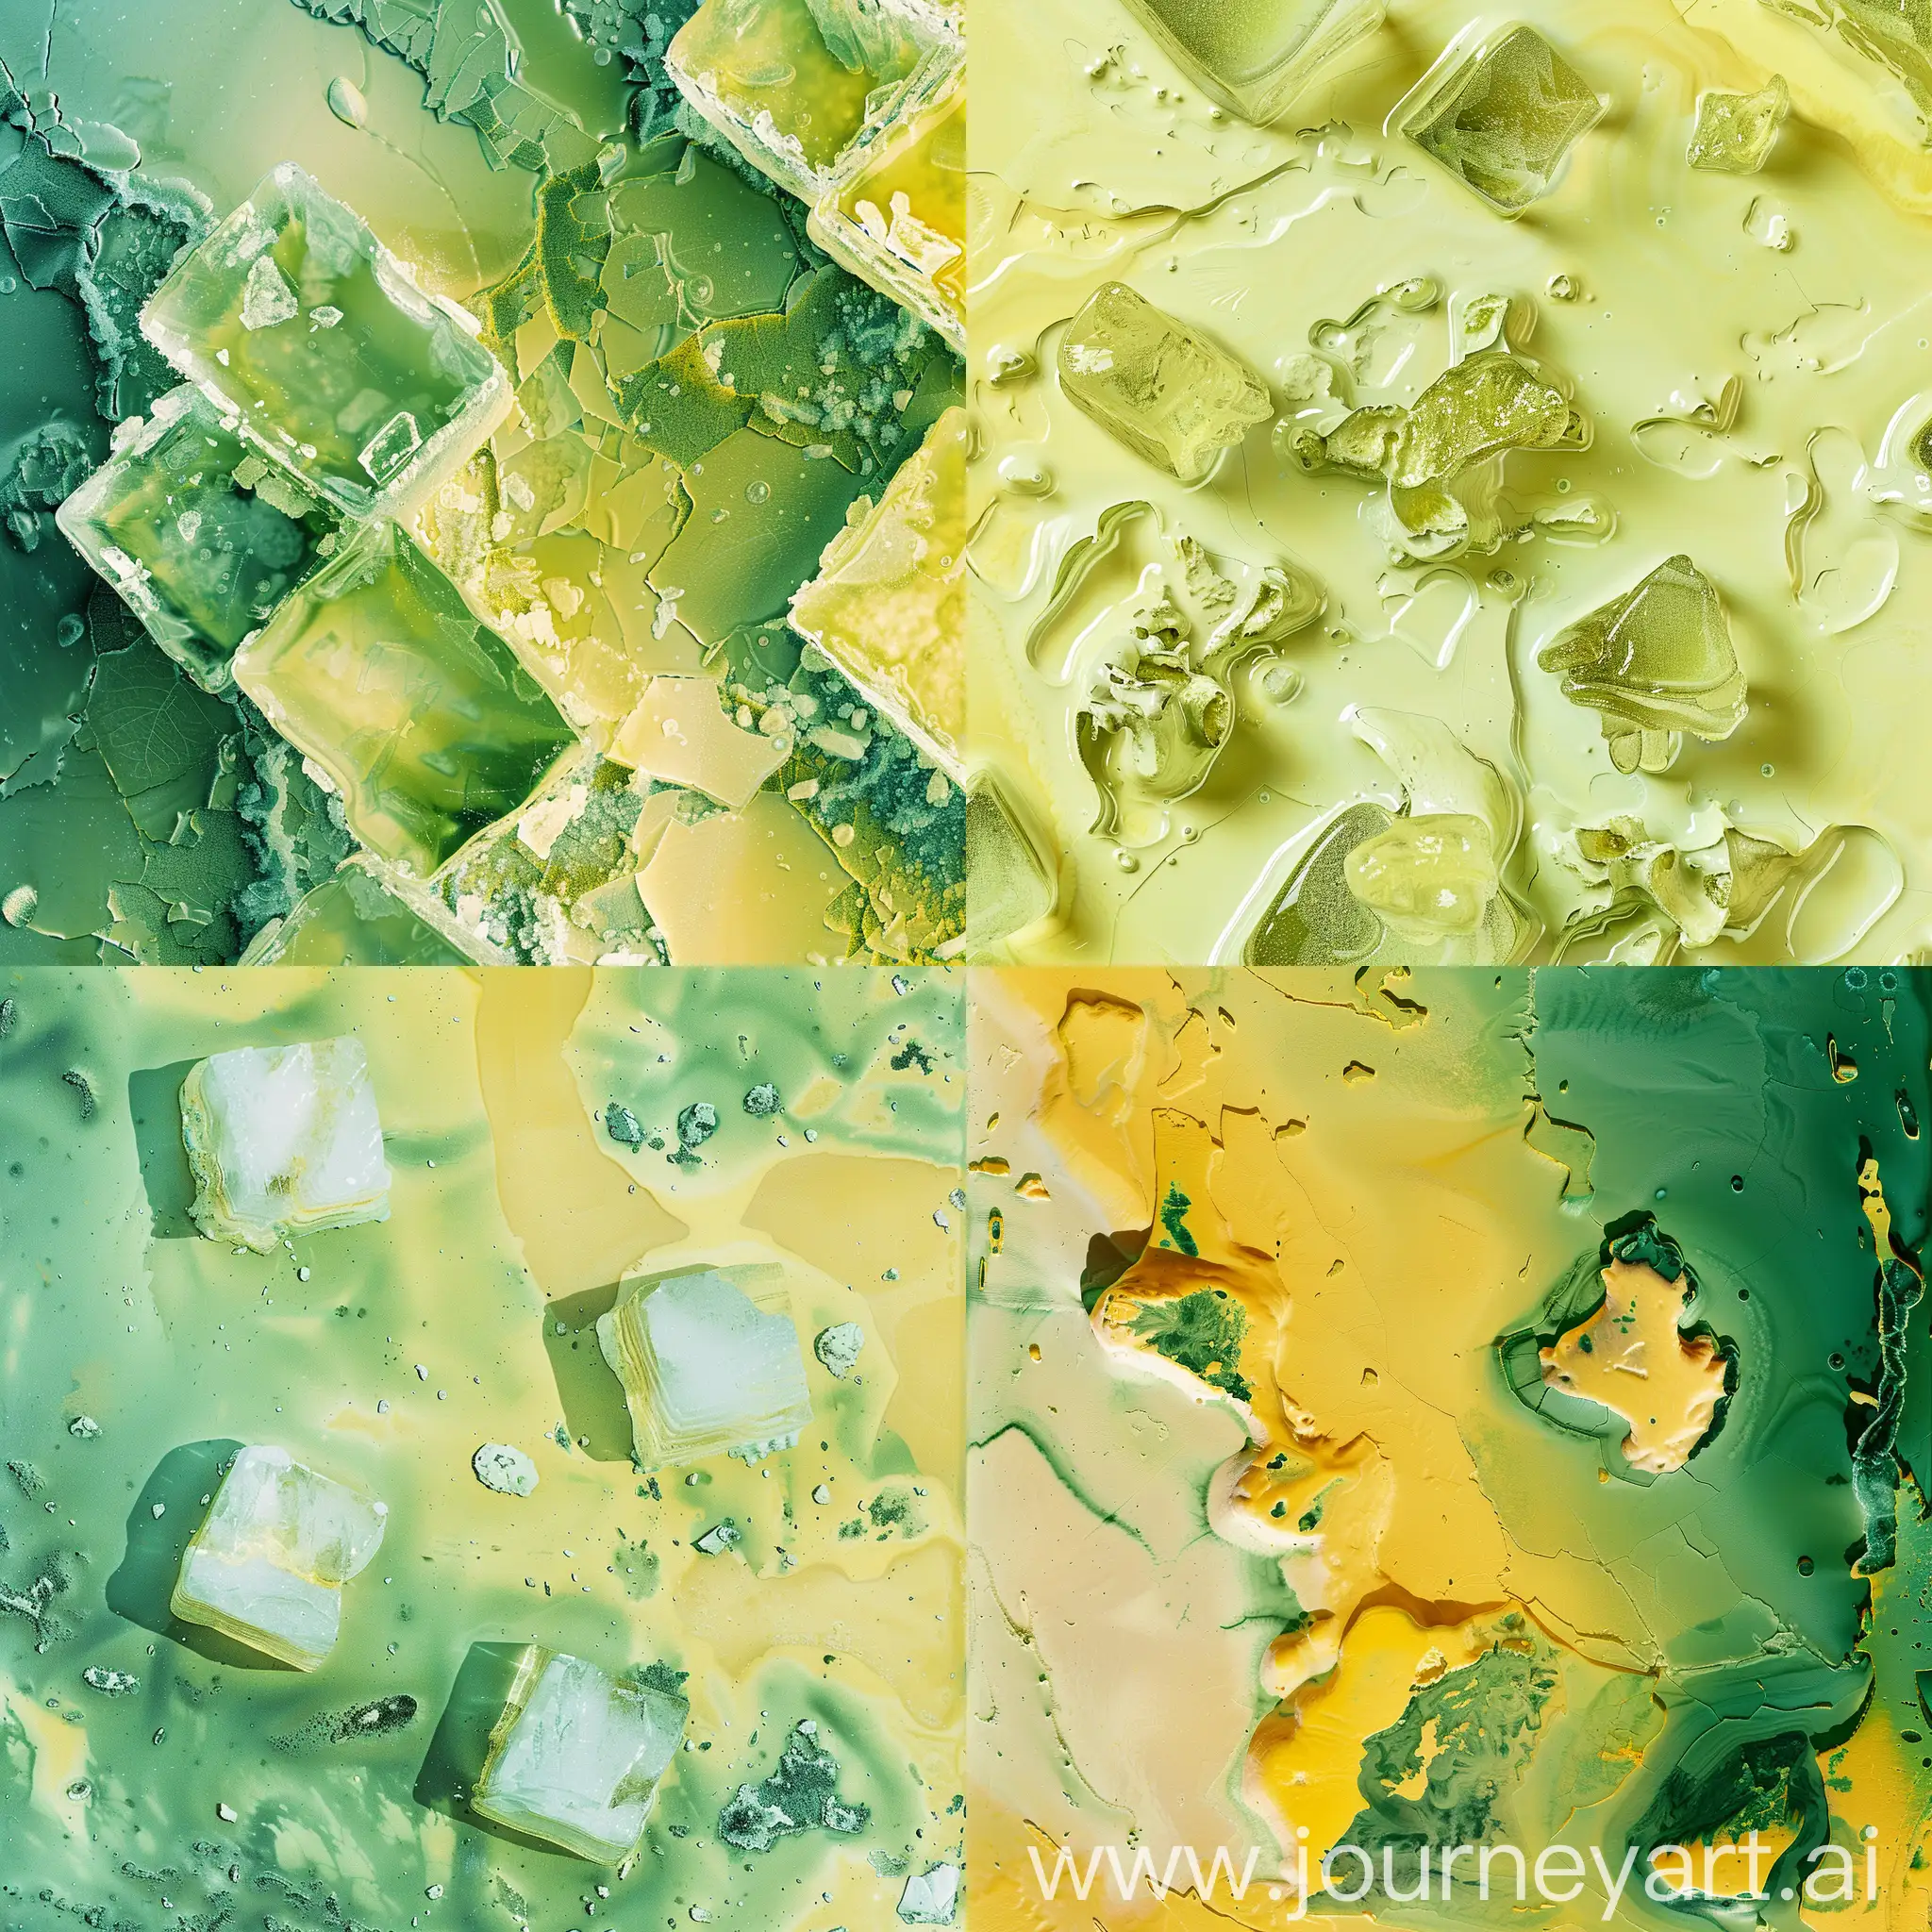 explorers discover methanol contaminating ancient ice cubes from nasa satellite, in the style of light green and yellow, minimalistic surrealism, birds-eye-view, bold color contrast, canon eos 5d mark iv, figura serpentinata, australian landscape